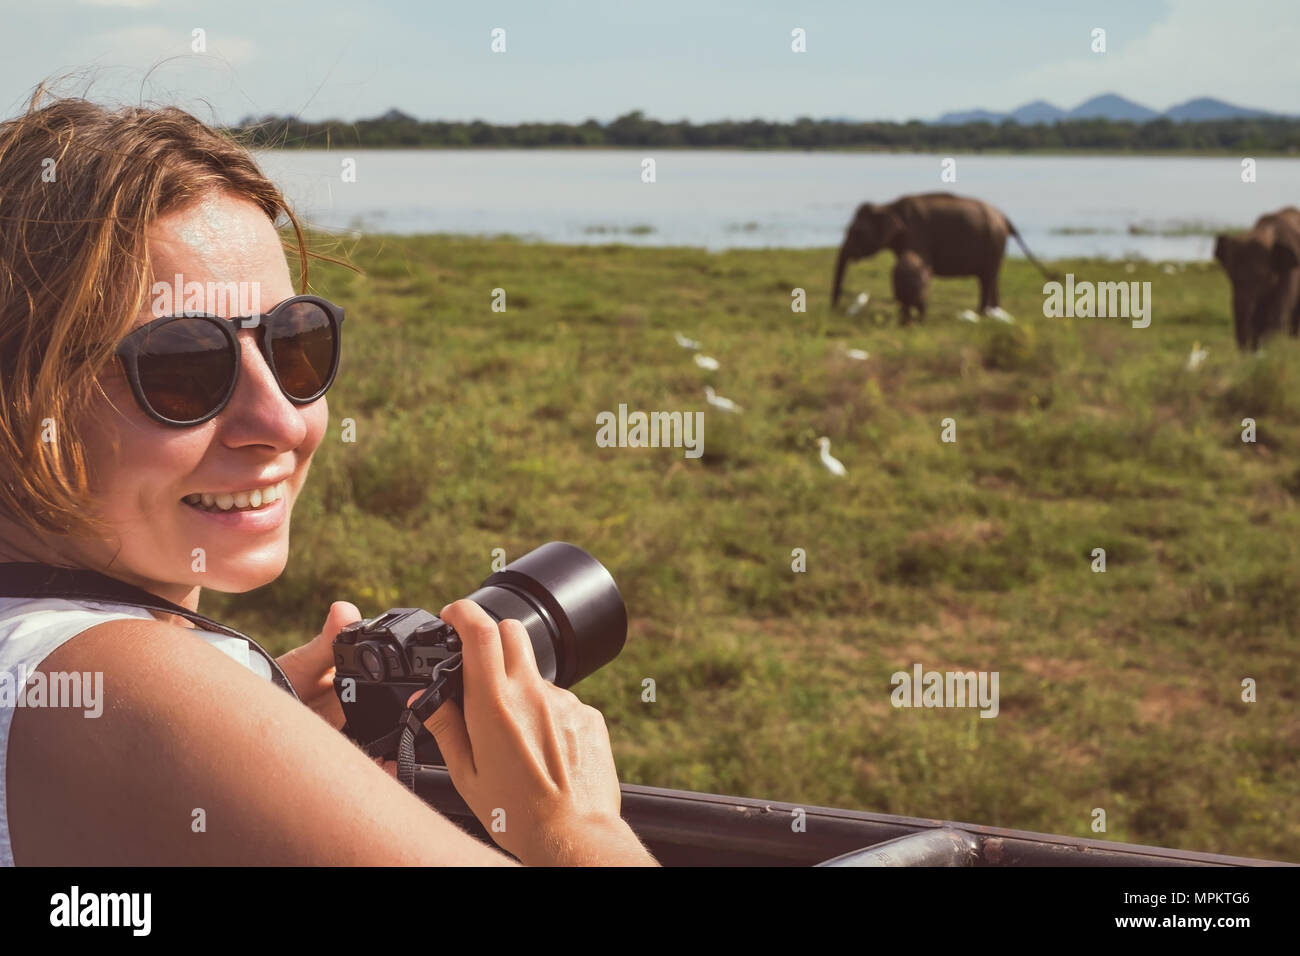 Woman on asian wildlife safari. Lady taking a photo of herd of elephants with her camera. Stock Photo